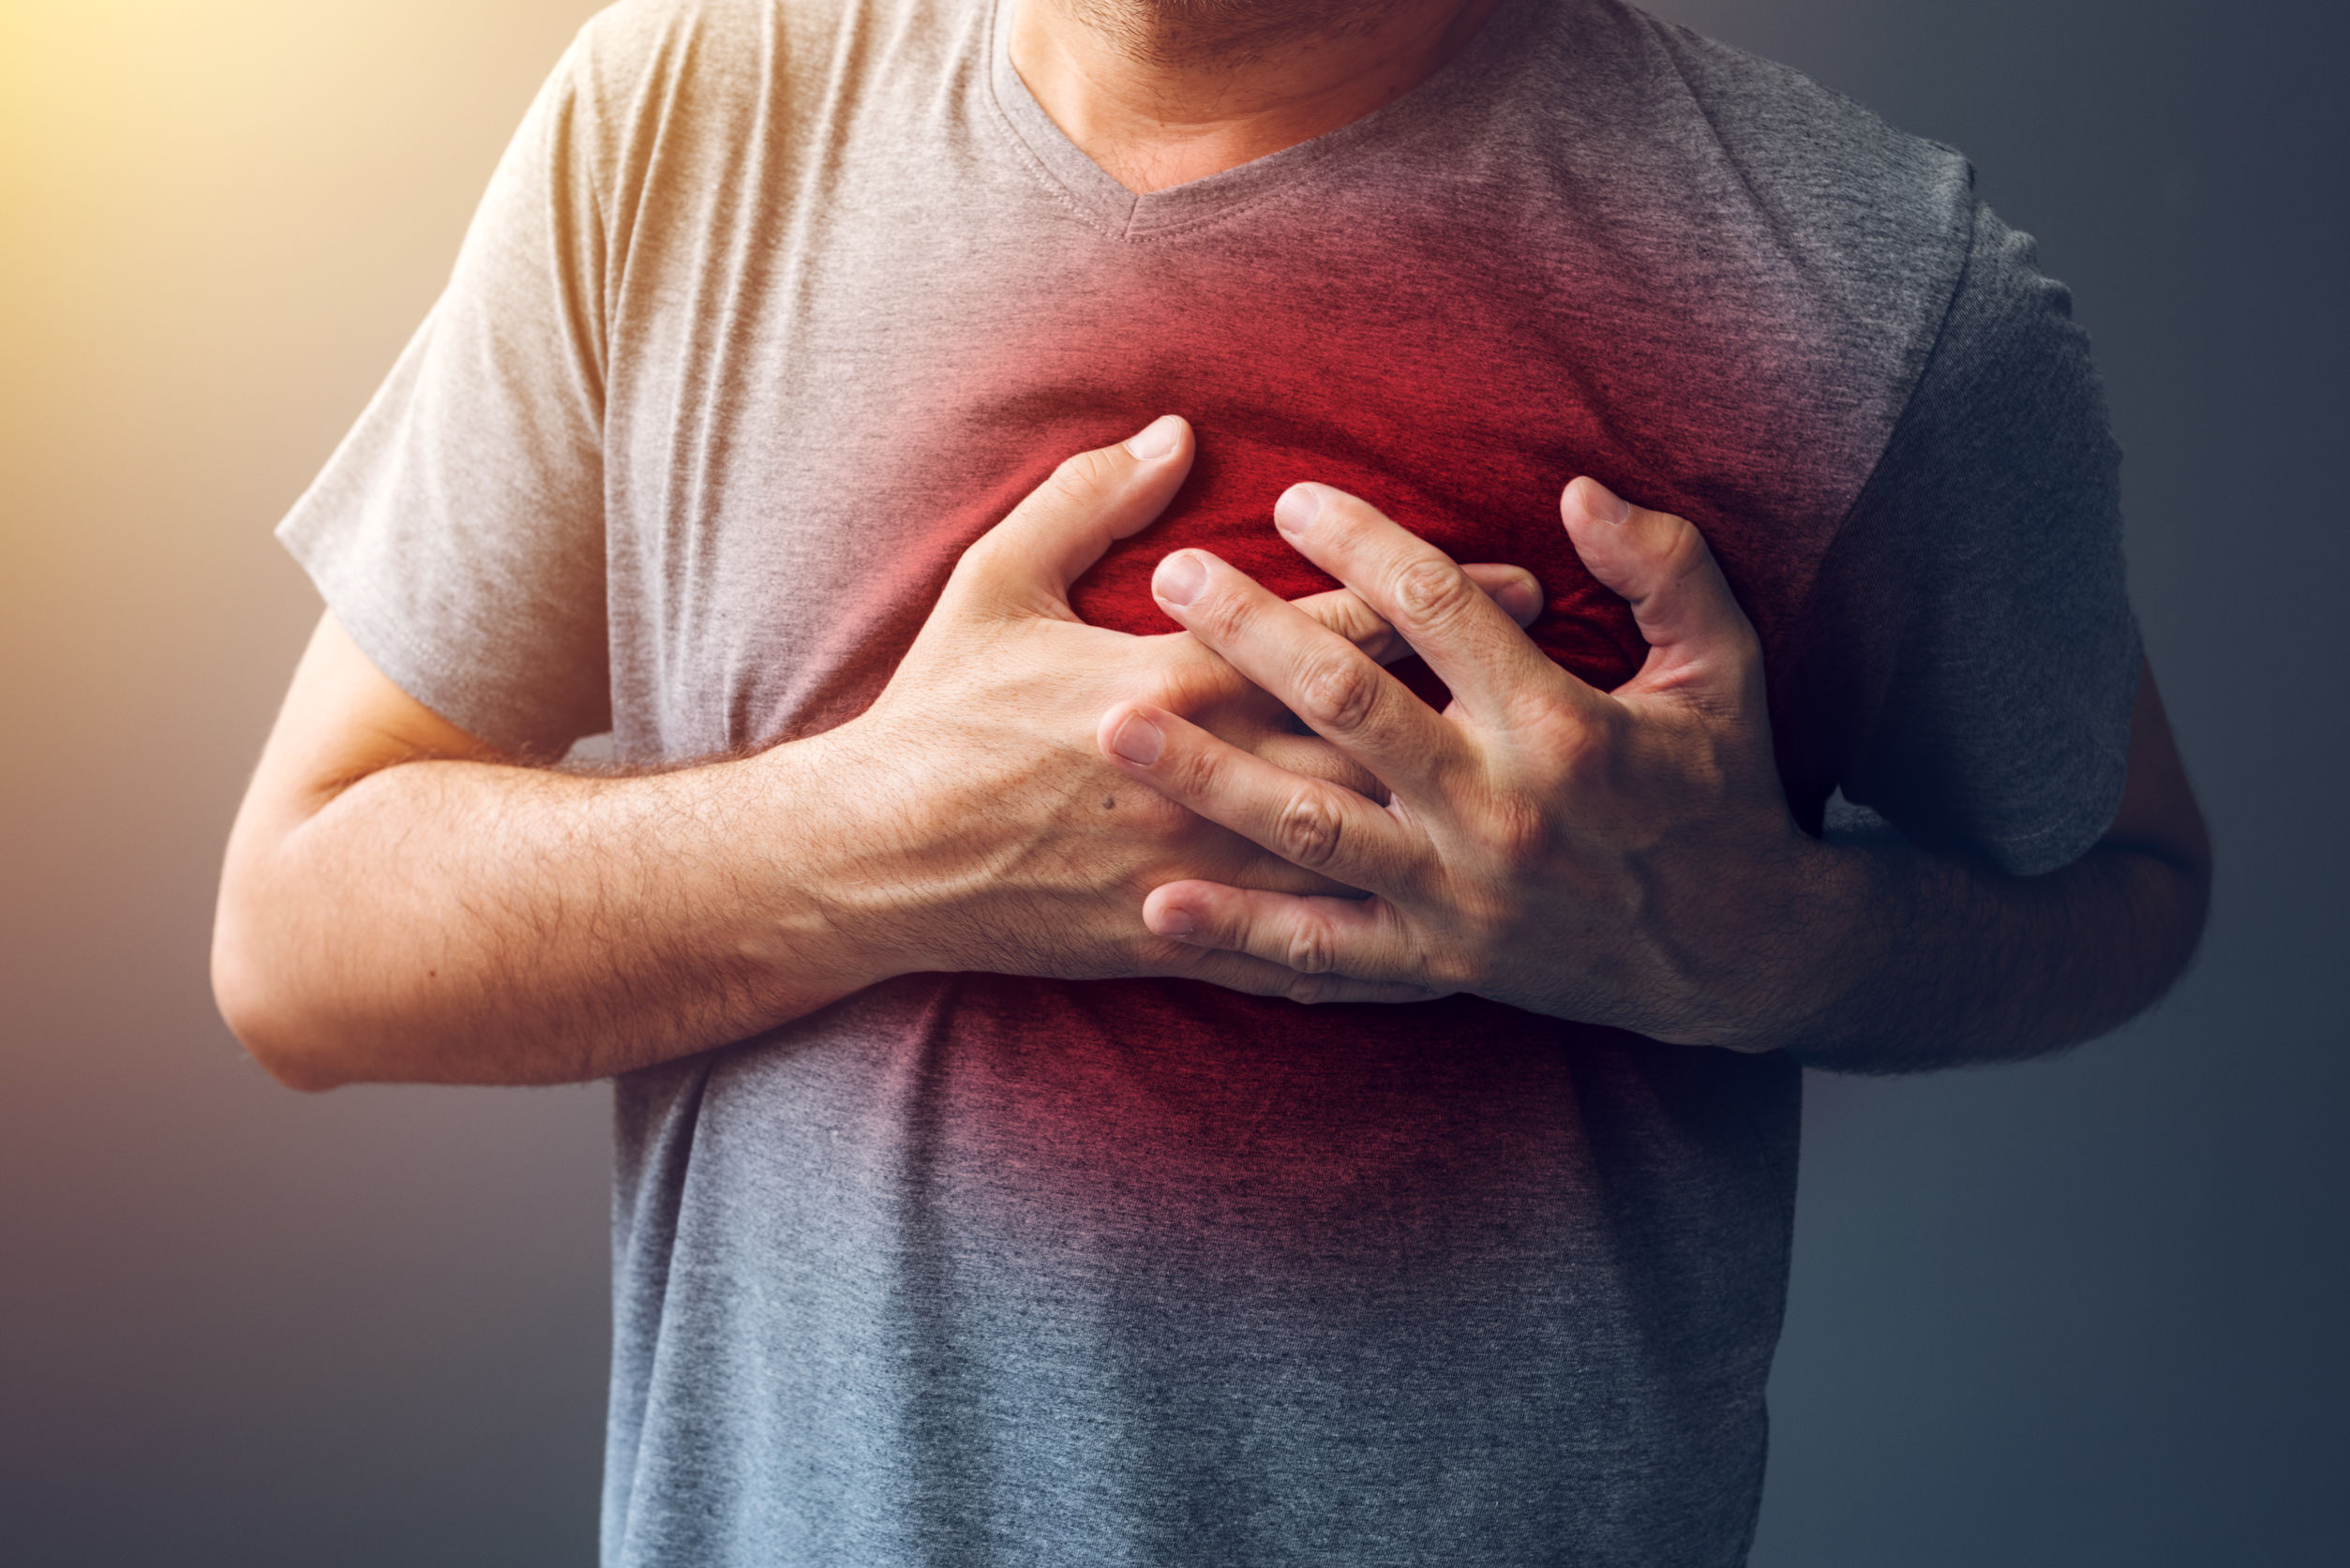 Diagnosis and solutions if you experience chest pain